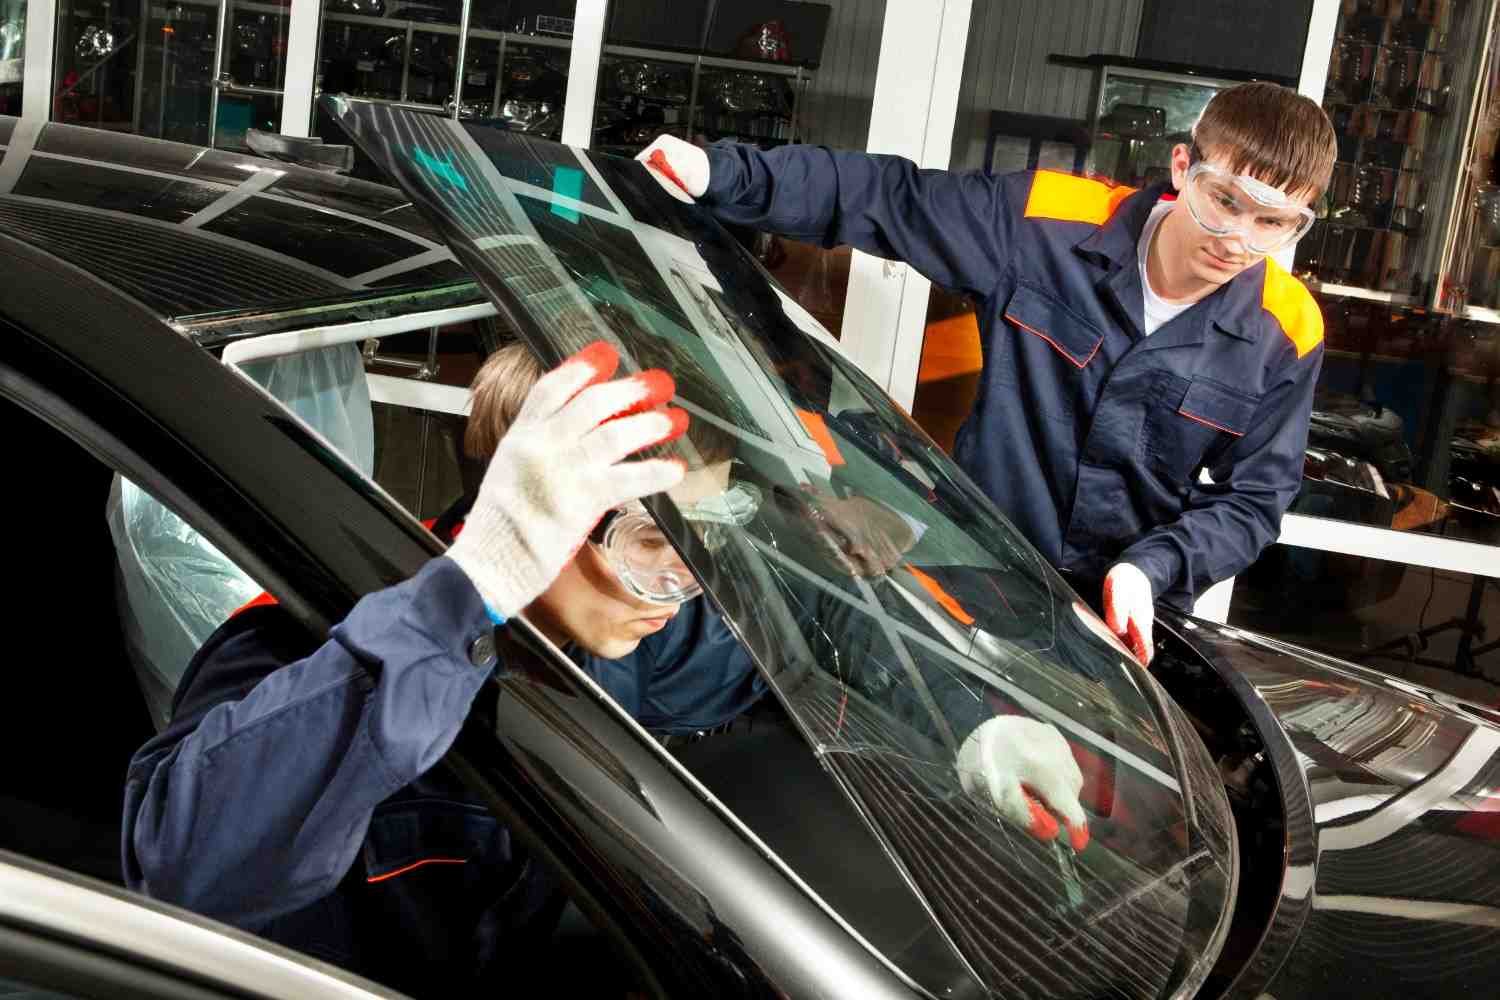 Get Fast Reliable Auto Glass Repair with Las Vegas Mobile Auto Glass in Sunrise Manor